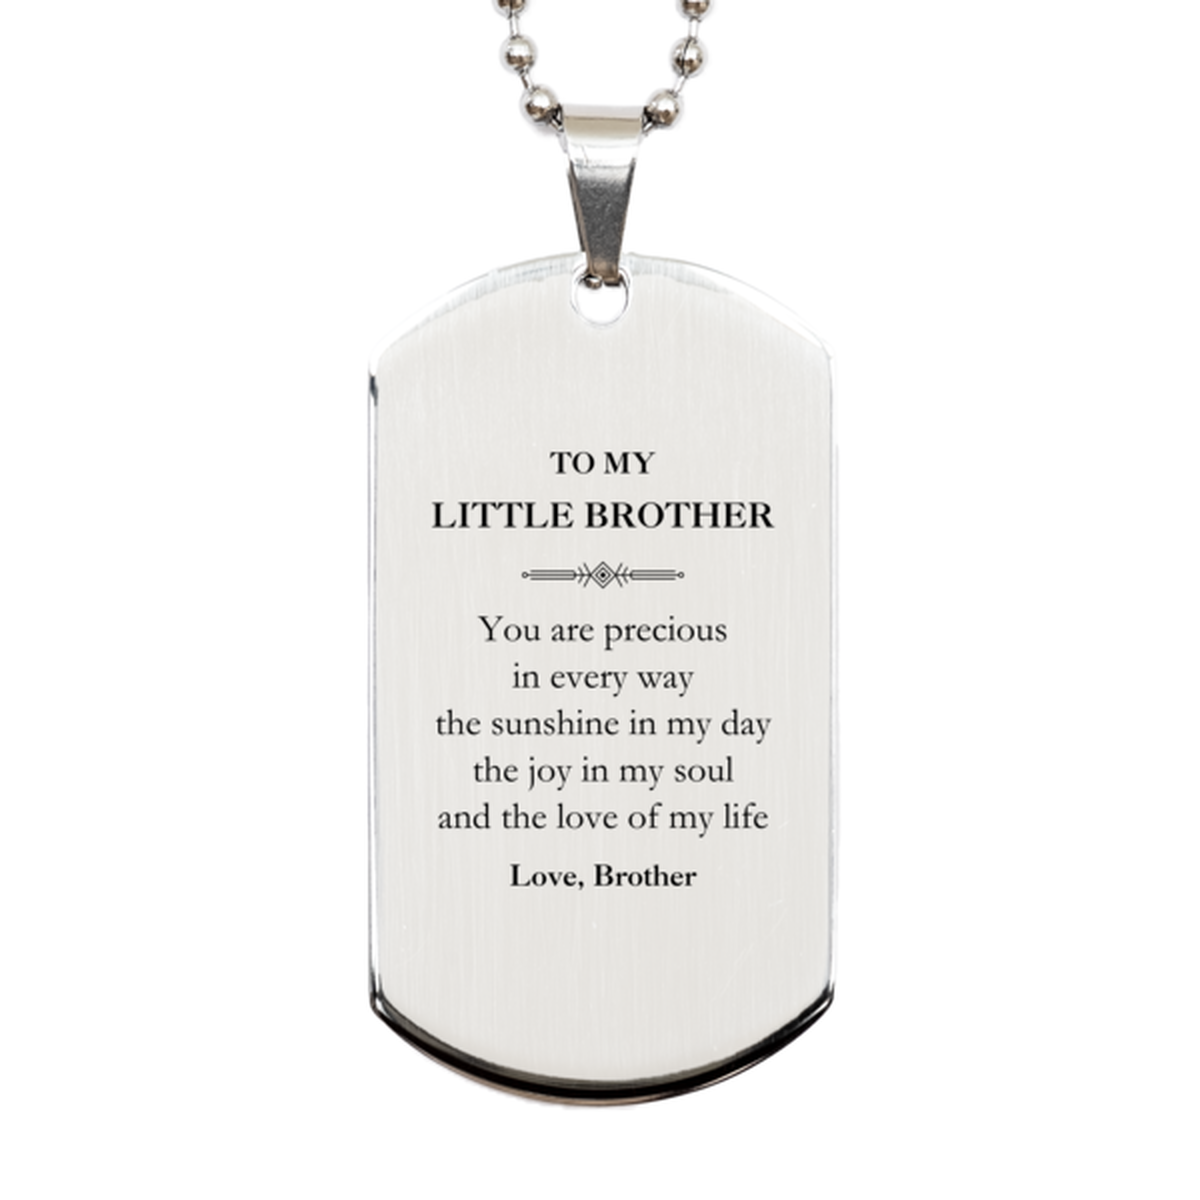 Graduation Gifts for Little Brother Silver Dog Tag Present from Brother, Christmas Little Brother Birthday Gifts Little Brother You are precious in every way the sunshine in my day. Love, Brother